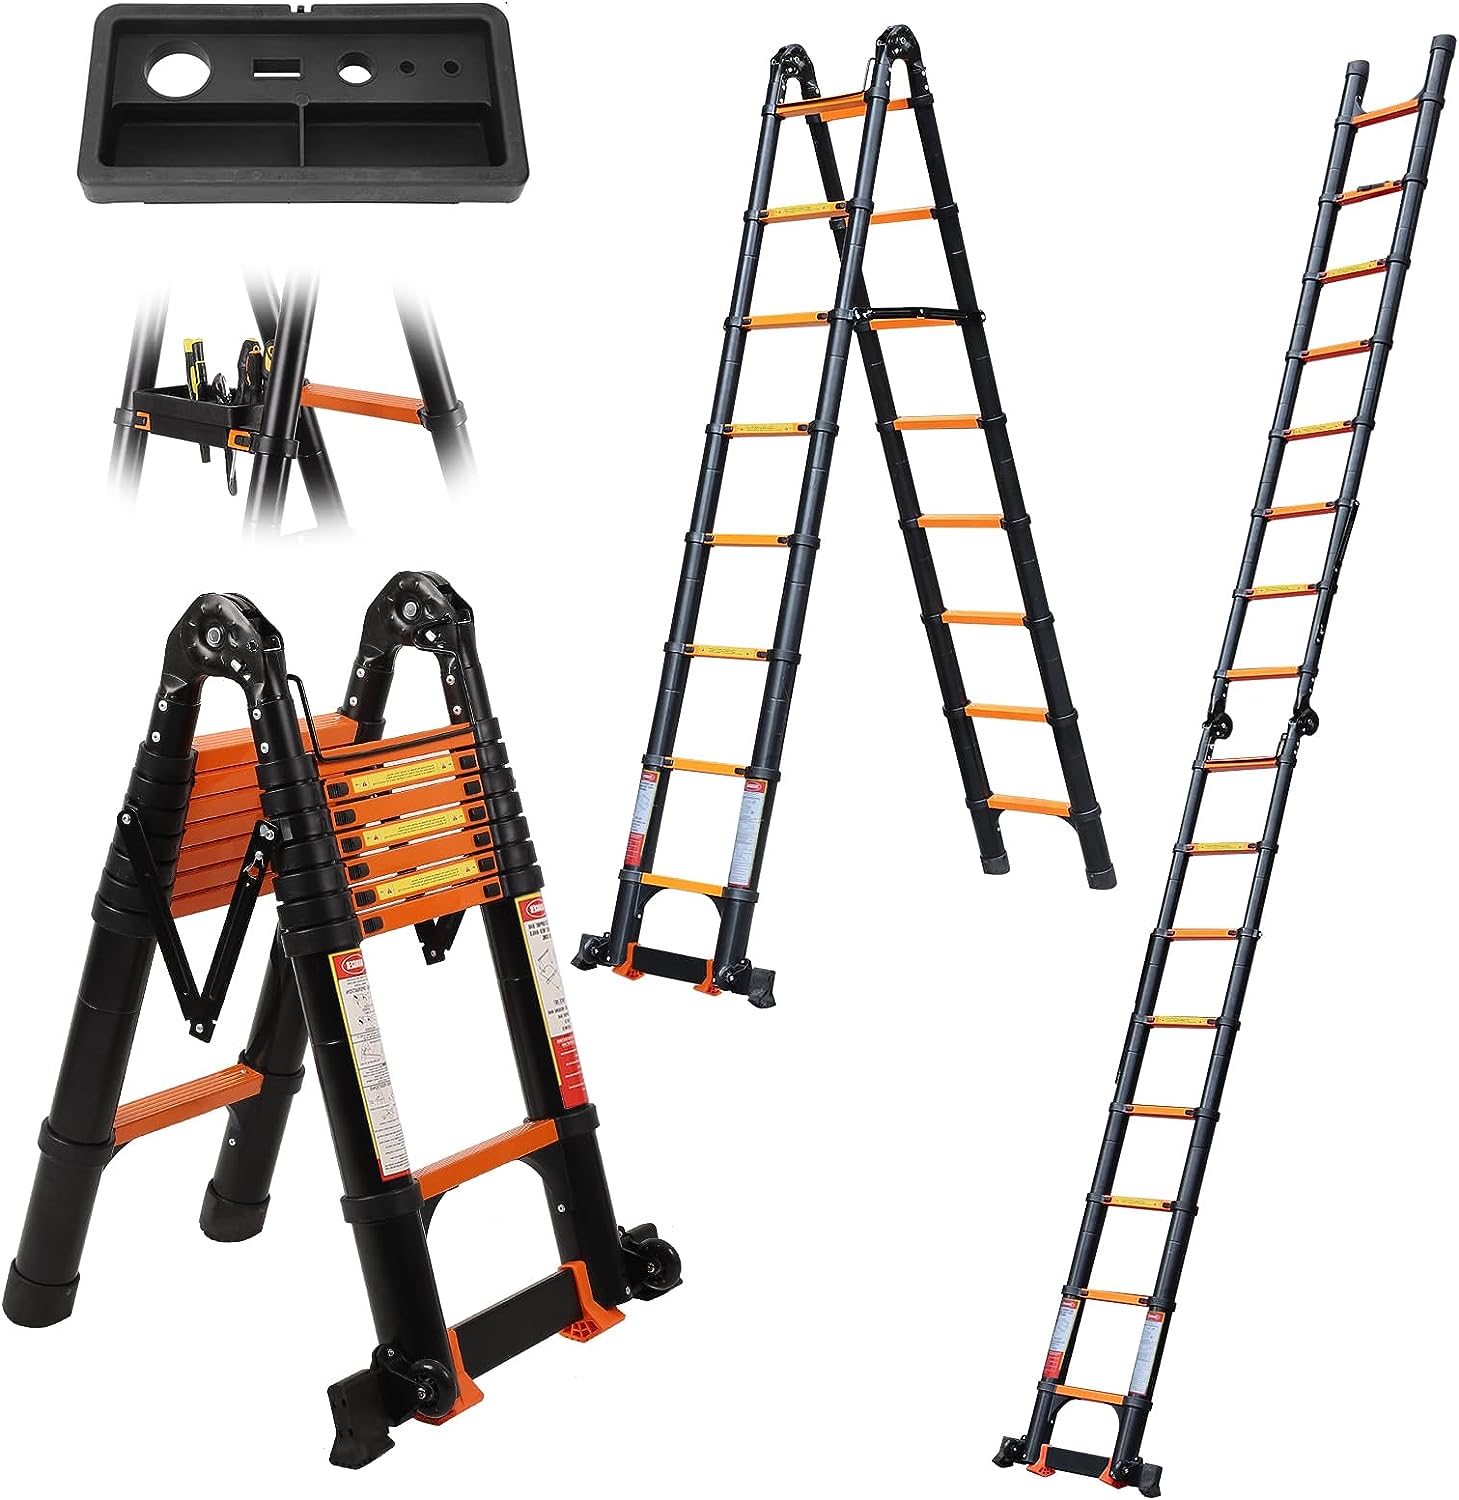 The 16.5FT Telescoping A-Frame Ladder has redefined my expectations when it comes to functionality, stability, and convenience. Features: The 2023 New Upgrade of this telescoping ladder truly stands out. With strengthened joints, a stabilizer bar, and wheels, it's taken durability, stability, and portability to a whole new level. Crafted from high-quality aluminum alloy, this ladder ensures excellent load-bearing and non-slip performance. The maximum load-bearing capacity of 330lb is impressive and provides peace of mind during various tasks. The anti-slip stable design is a game-changer. Equipped with a ladder stabilizer and wider stabilizer bar, this ladder guarantees stability during use, enhancing user safety. The non-slip foot cover offers a strong grip, allowing you to concentrate on your work without worrying about slipping. A standout feature is the removable tool platform. This ladder includes a convenient tool tray, eliminating the need for constant trips to retrieve tools. It's a testament to thoughtful design and practicality, enhancing both convenience and longevity. Pros: Upgraded Excellence: Strengthened joints, a stabilizer bar, and wheels elevate the ladder's durability, stability, and portability. Stable and Secure: The ladder's anti-slip design, ladder stabilizer, and wider bar ensure a safe and stable experience, even during demanding tasks. Convenience Redefined: The removable tool platform simplifies work by keeping tools within reach, enhancing efficiency and prolonging the ladder's life. Versatile Utility: This ladder transforms into an A-Frame ladder or a 16.5FT straight ladder, making it suitable for various tasks from decorating to outdoor projects. Effortless Mobility: The inclusion of two wheels and a retractable design makes moving and storing the ladder a breeze, saving both effort and space. Cons: In my experience, the 16.5FT Telescoping A-Frame Ladder has met and exceeded its promises. I haven't encountered any downsides. Final Thoughts: The 16.5FT Telescoping A-Frame Ladder is a revelation for anyone seeking a ladder that's truly versatile, durable, and safe. Its enhanced features, such as the stabilizer bar, wheels, and tool platform, demonstrate a commitment to user comfort and convenience. Whether it's for home projects, outdoor activities, or even RV travels, this ladder proves its worth. The combination of strength, stability, and thoughtful design has made it an indispensable addition to my toolkit. I wholeheartedly recommend the 16.5FT Telescoping A-Frame Ladder to anyone in need of a ladder that goes above and beyond expectations.`